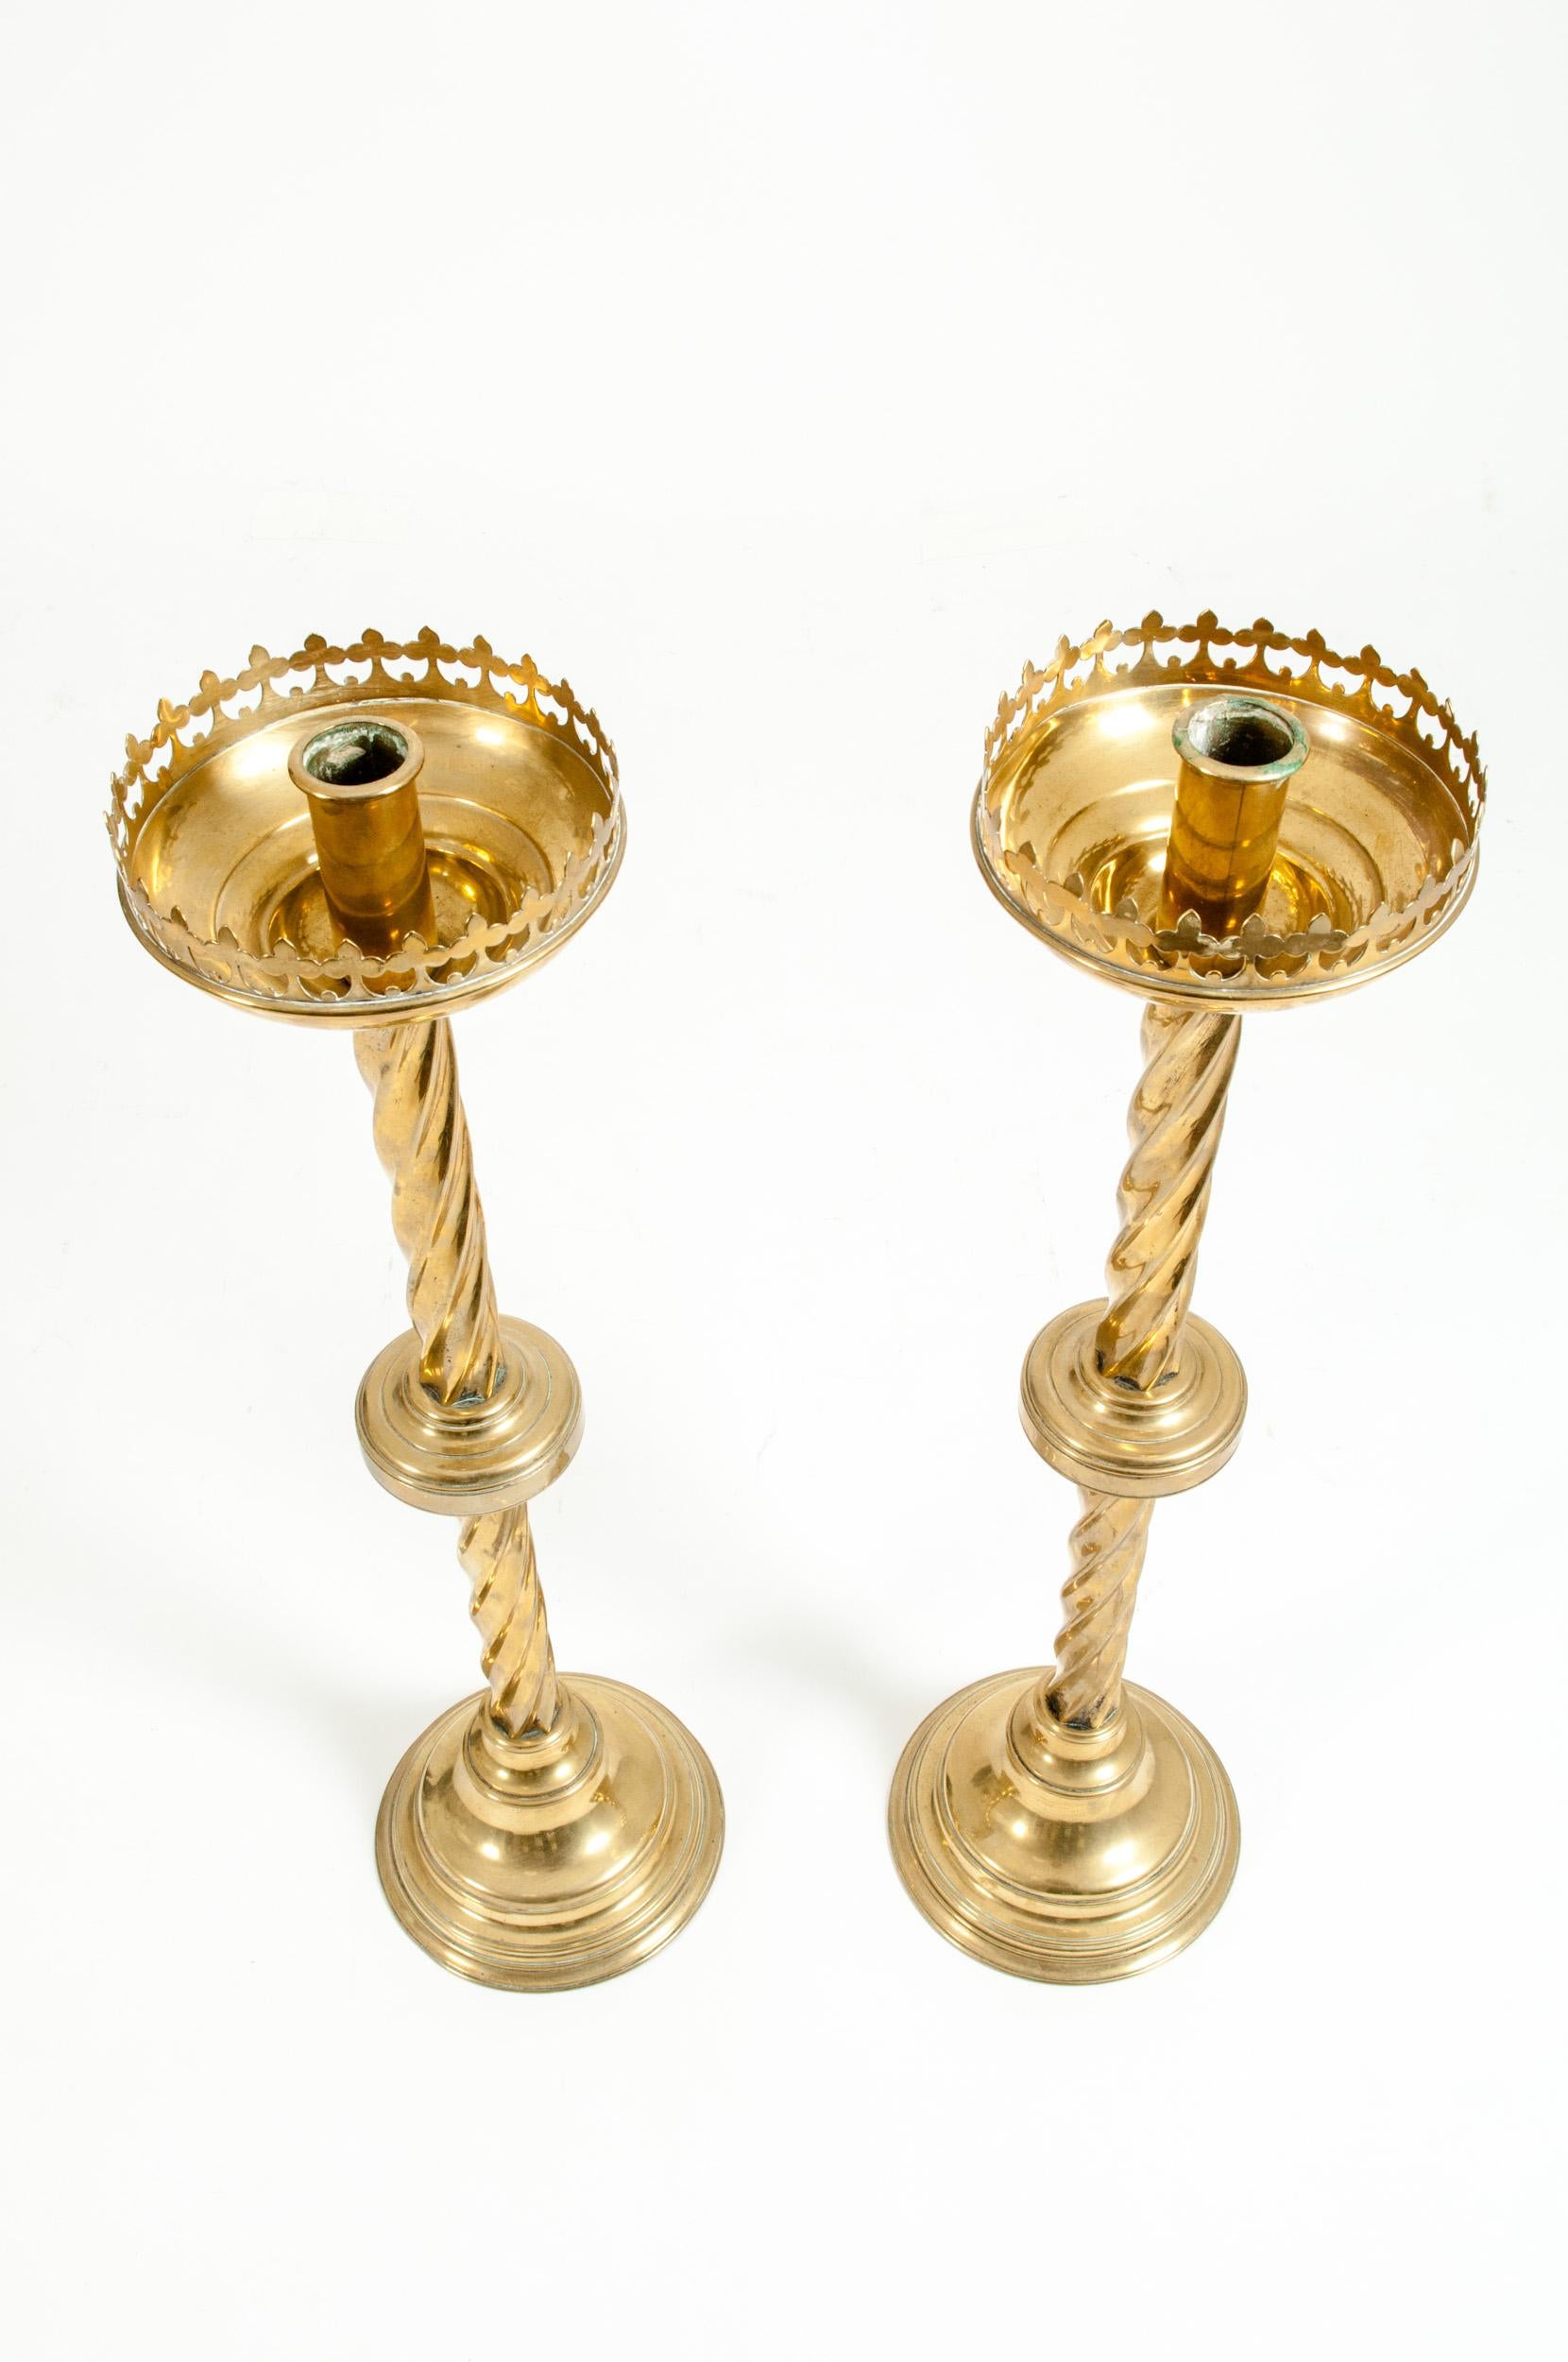 English Tall & Ornately Decorative Pair of 19th Century Gothic Style Brass Candlesticks